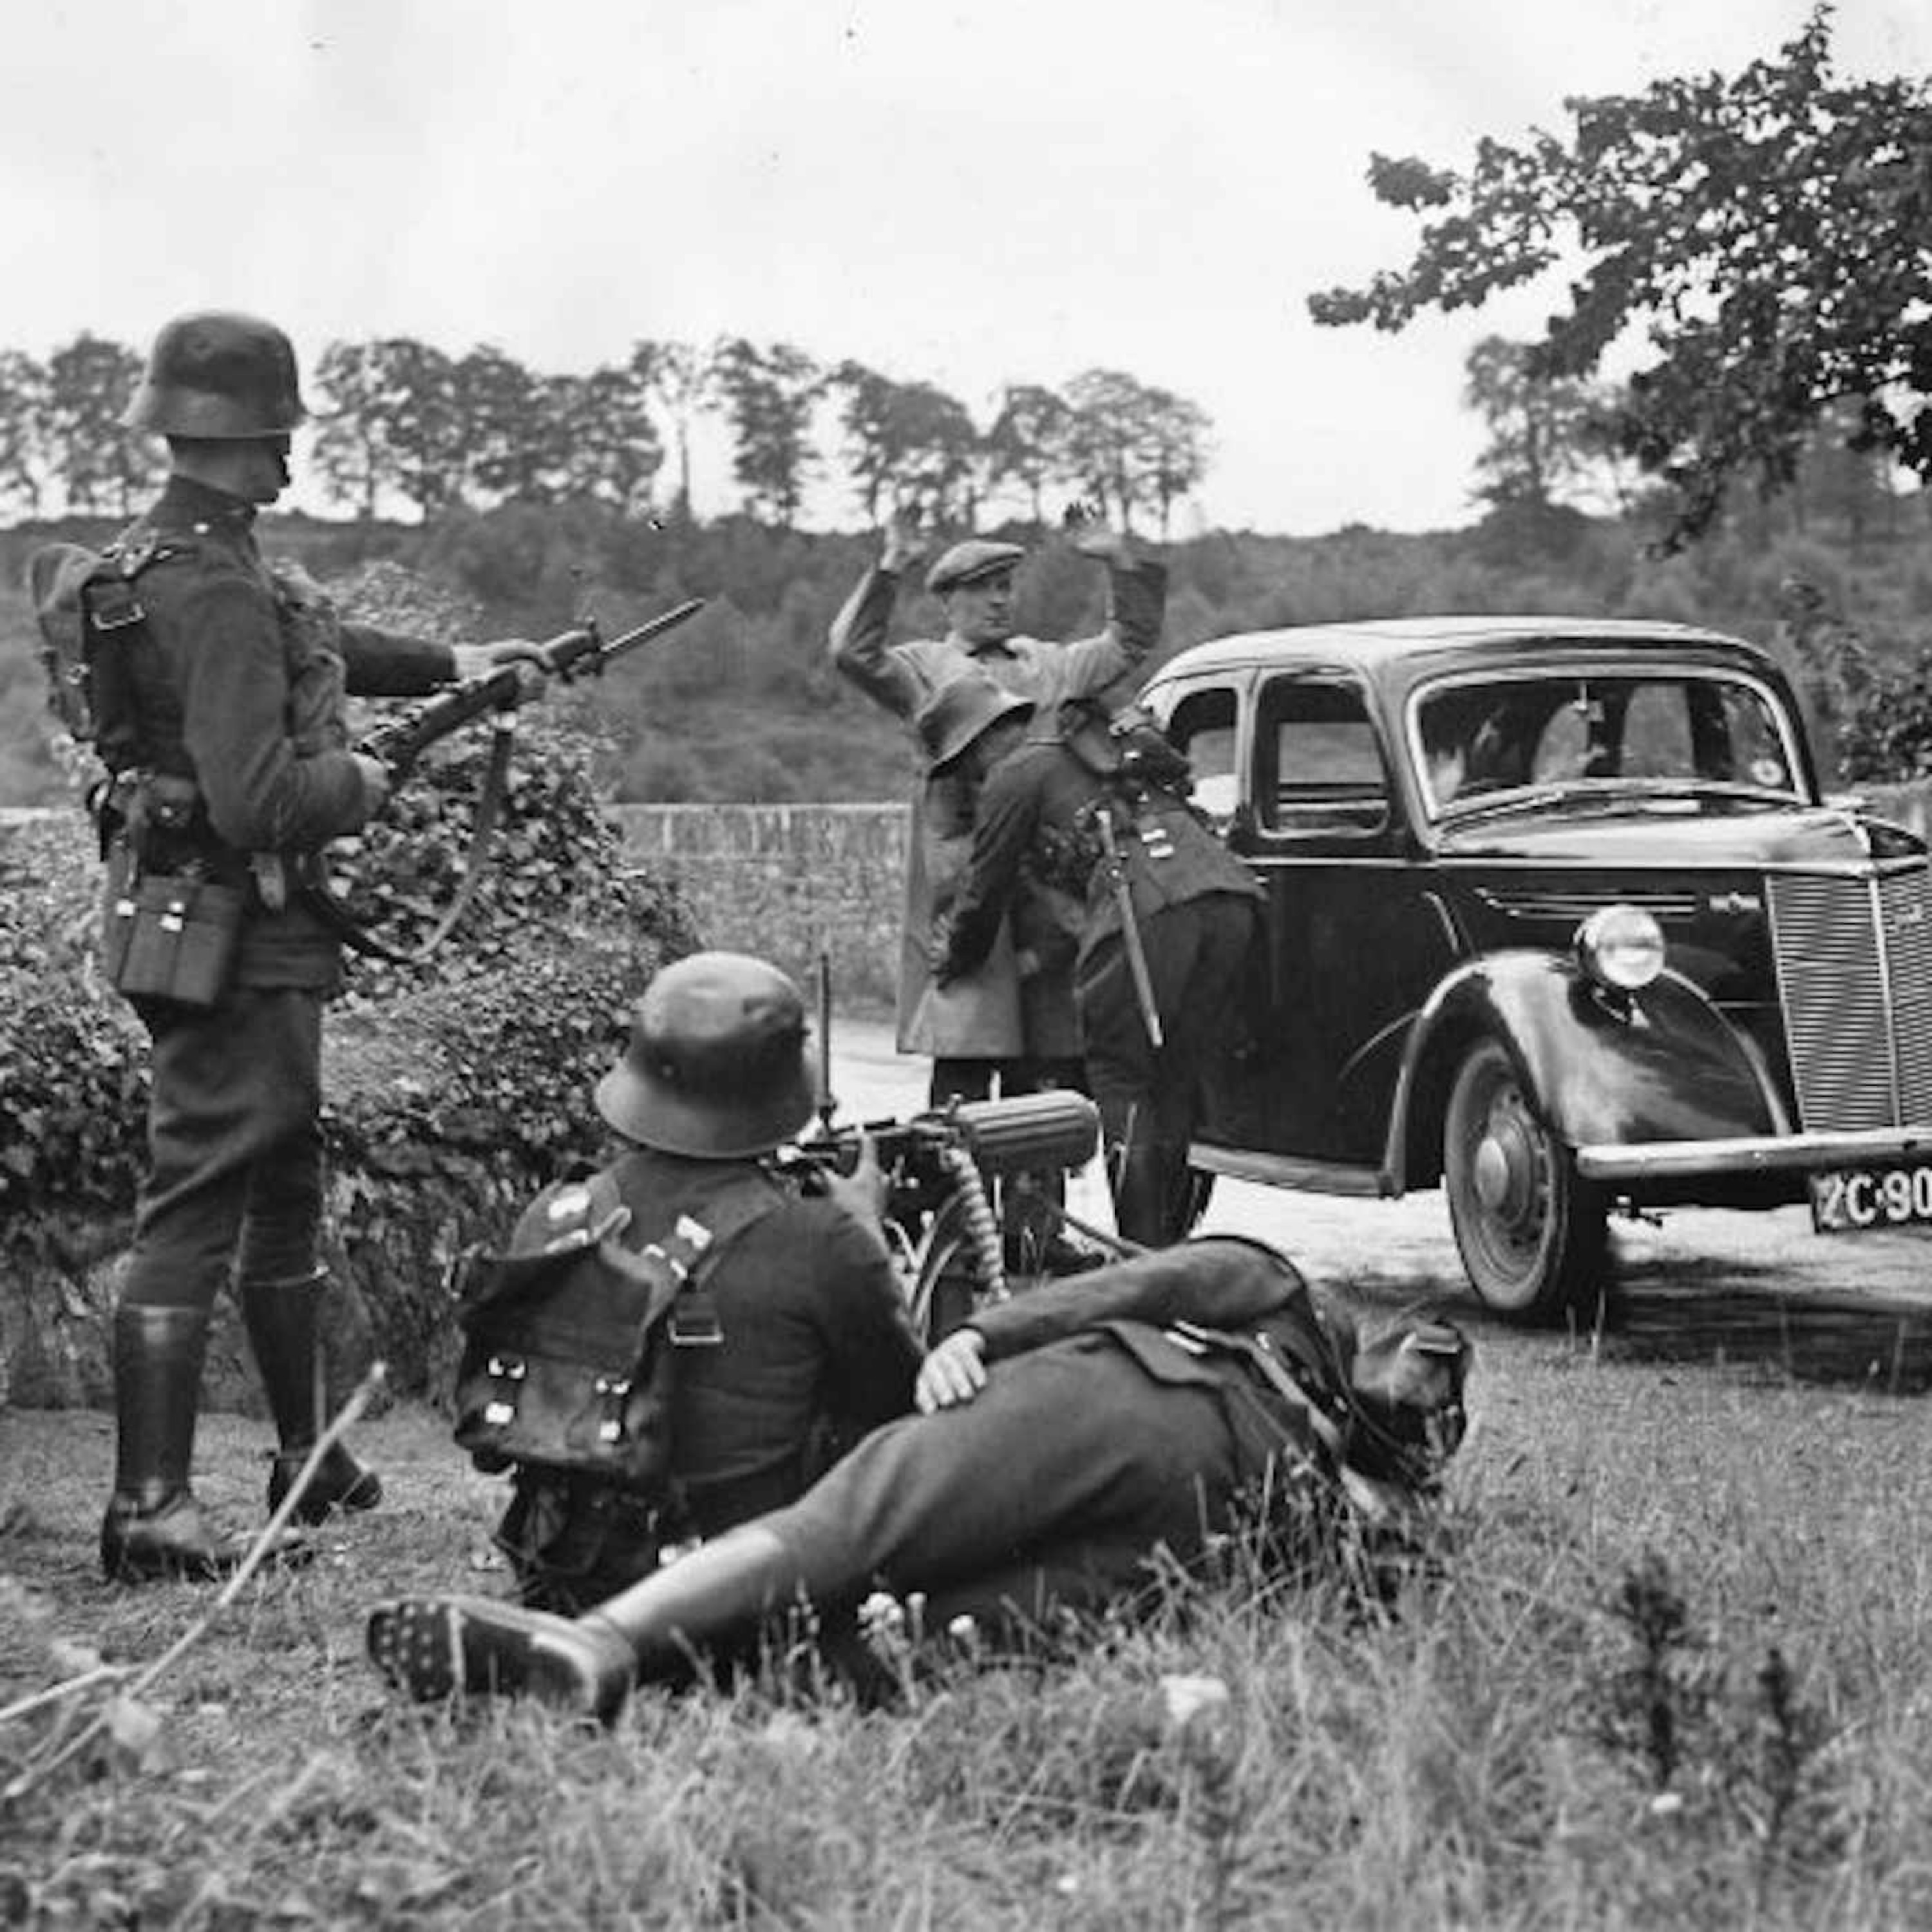 The Hunt For Nazi Spies In World War Ii Irish History Podcast On Acast 